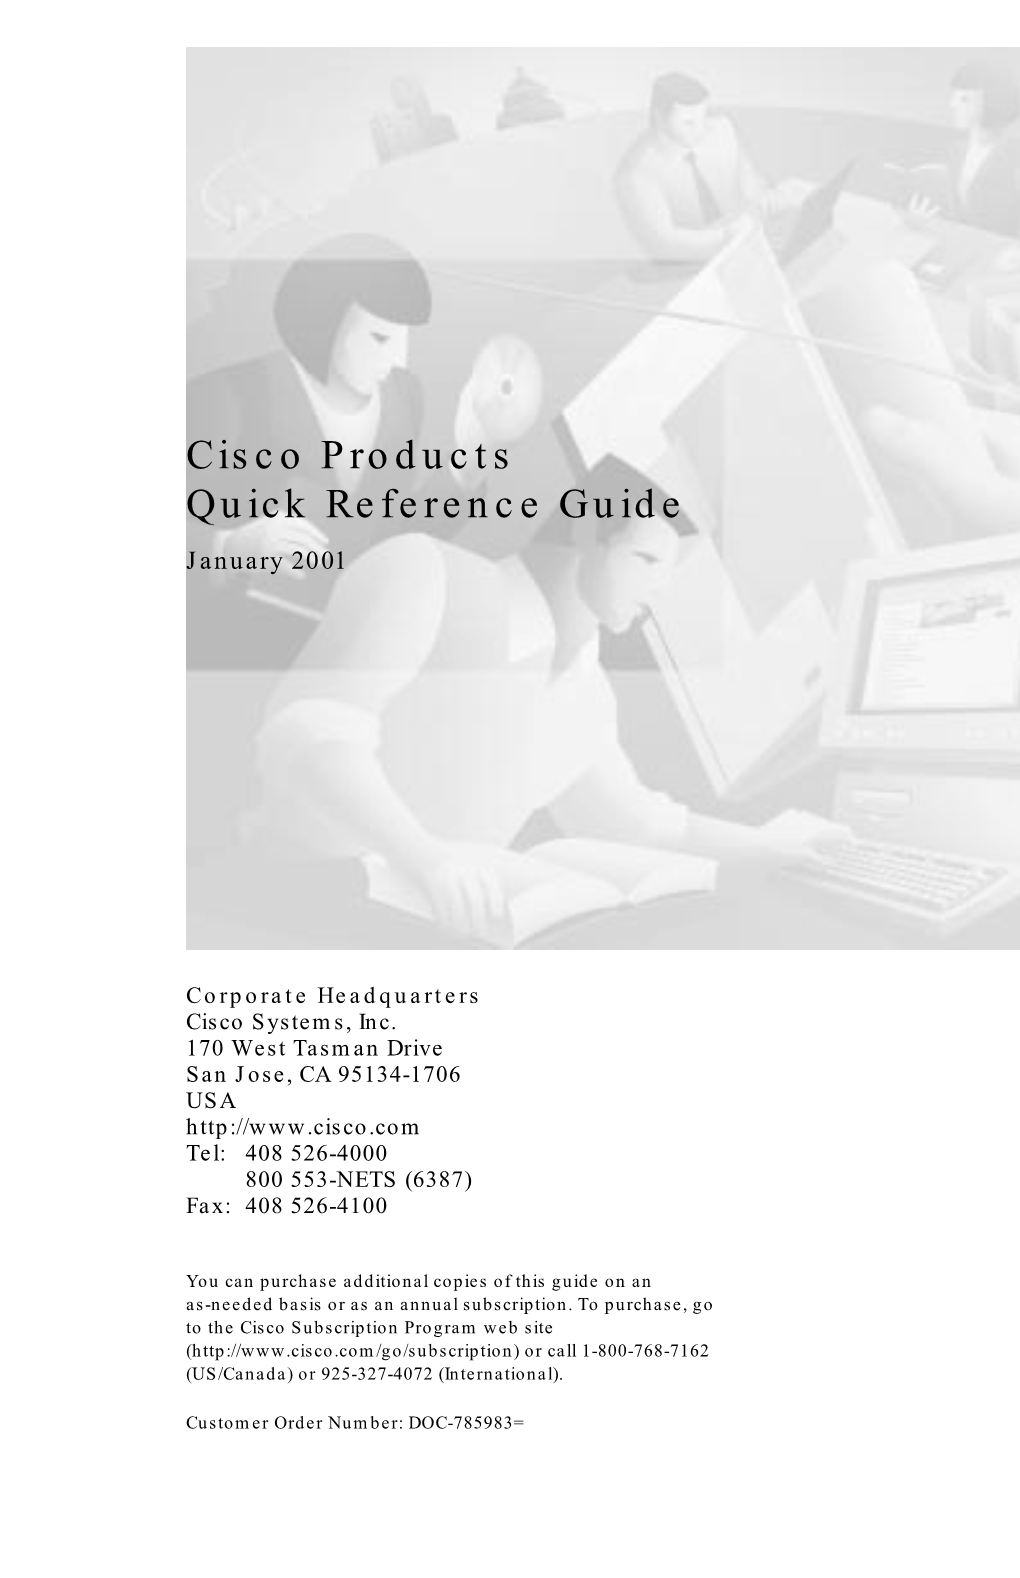 Cisco Products Quick Reference Guide January 2001